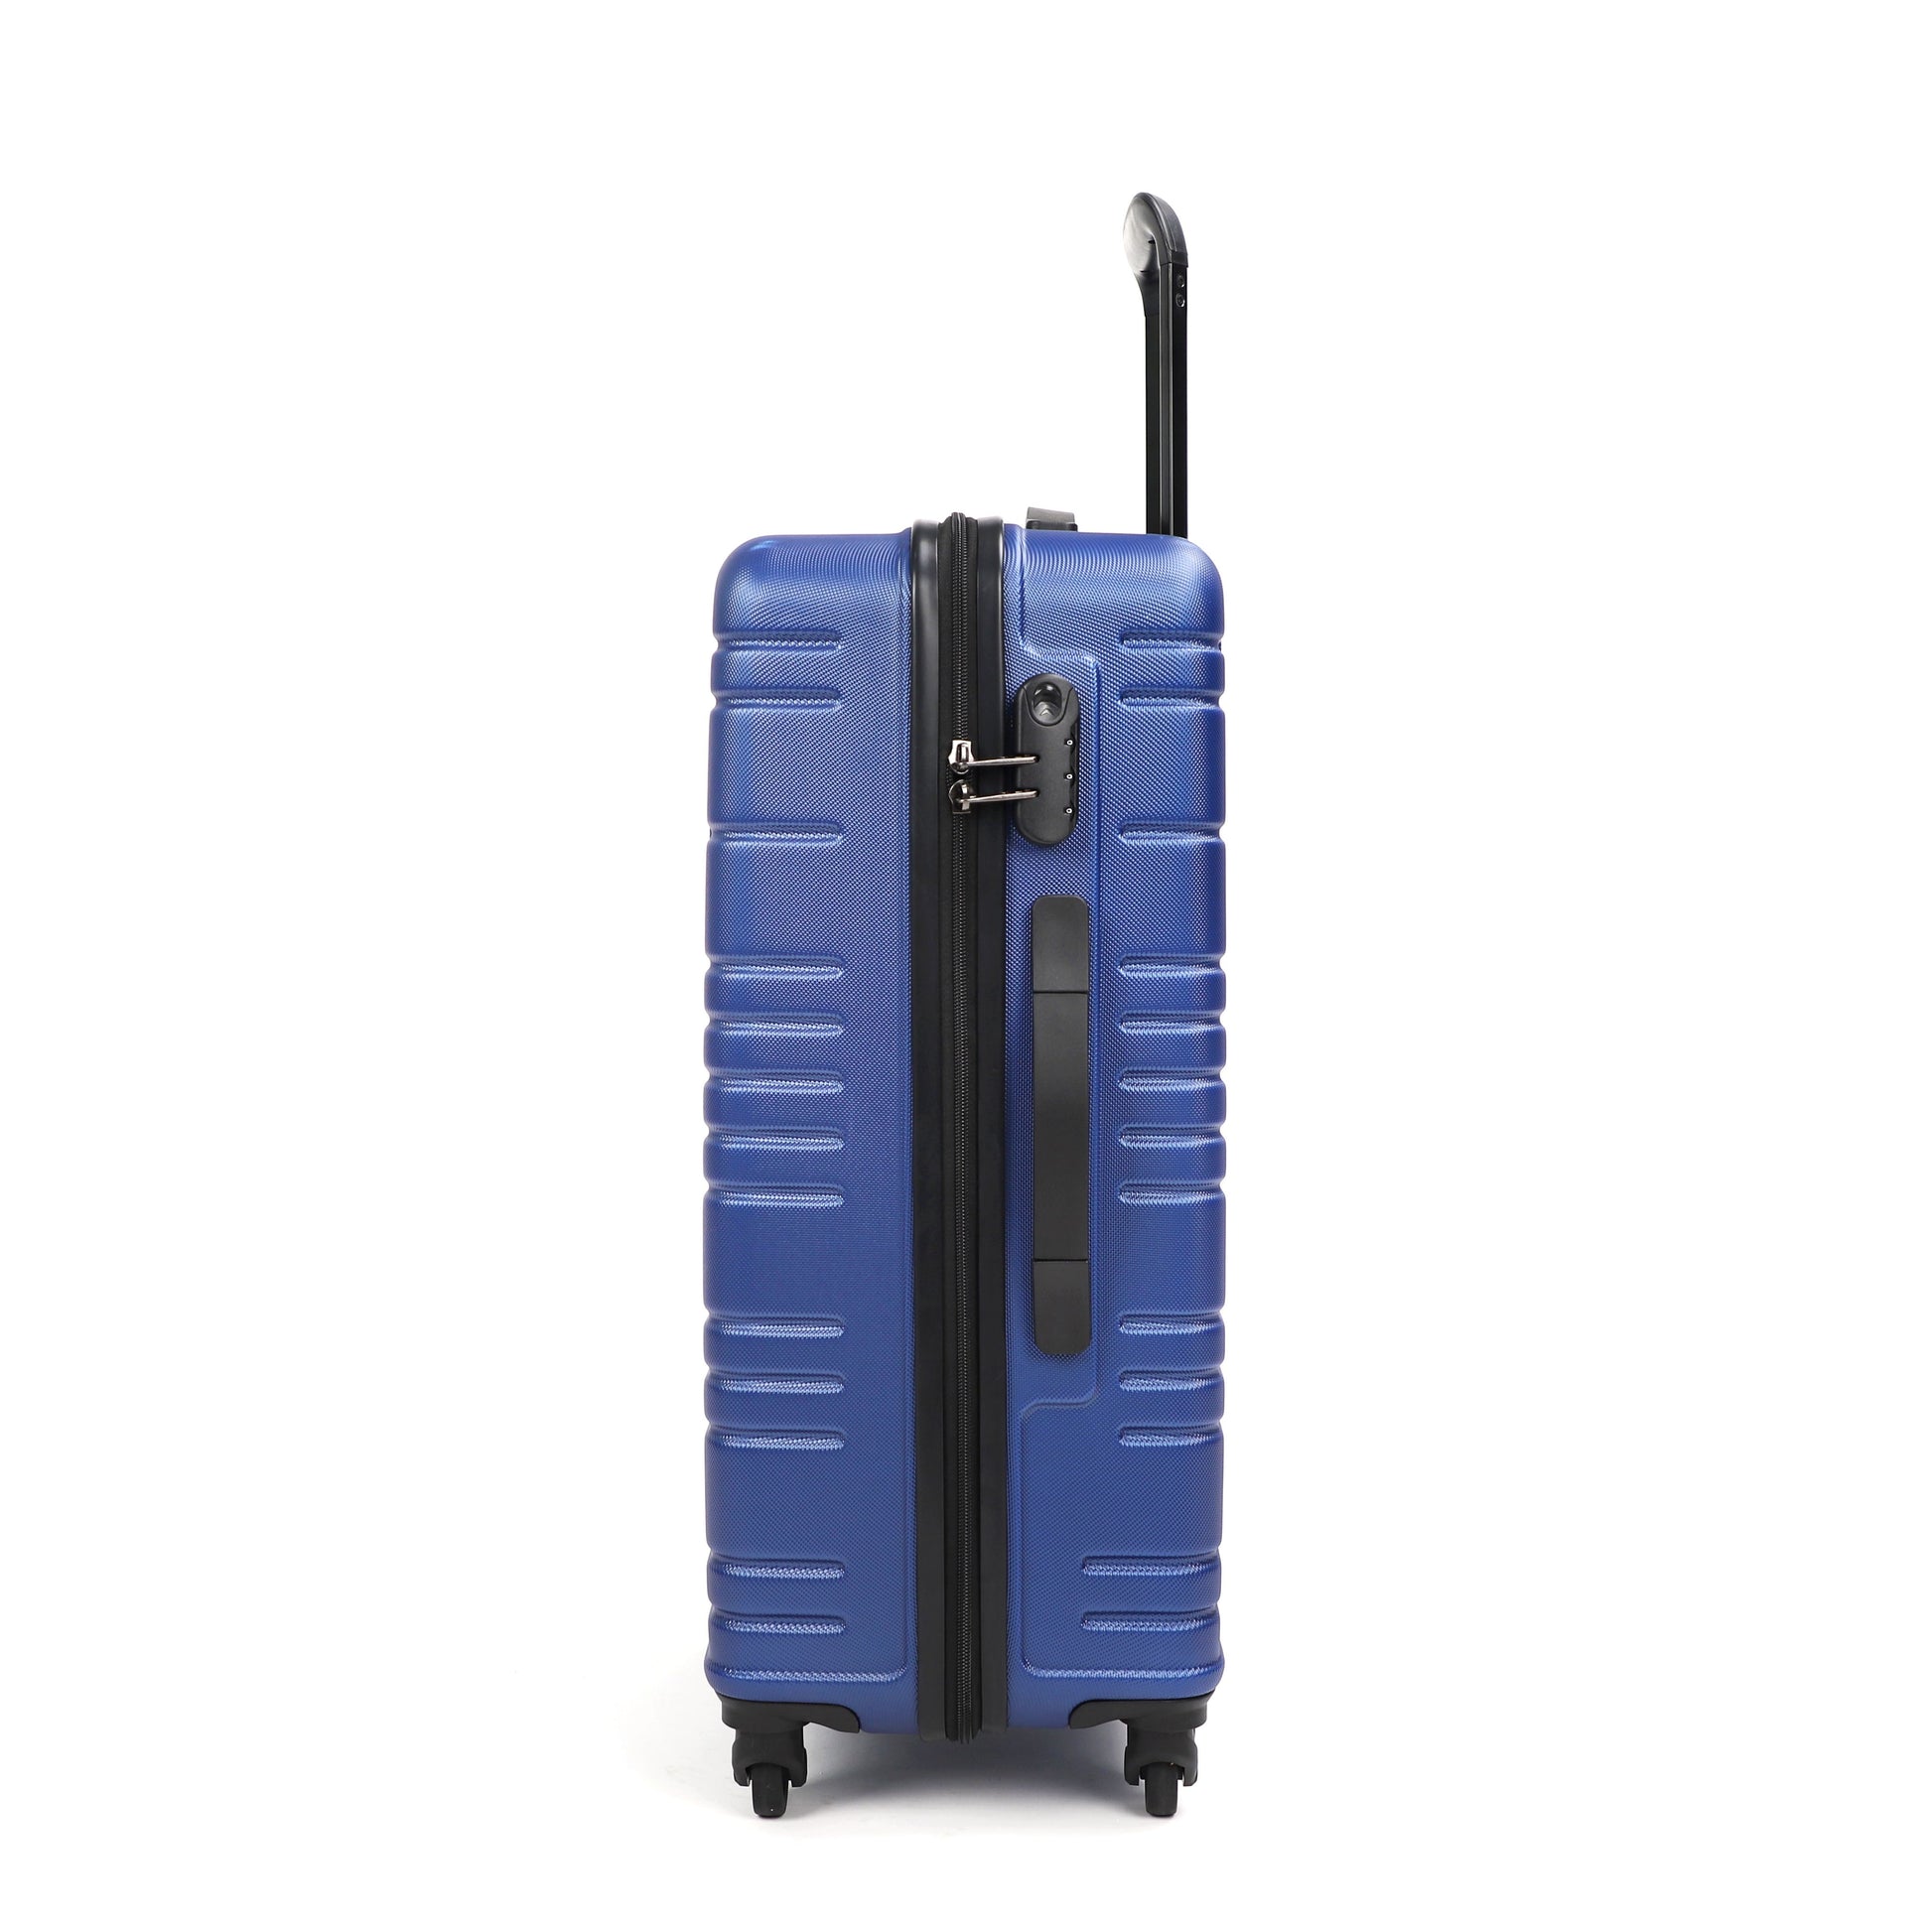 Airline_Luggage_Sets_3peice_Blue_right_view_N12721005